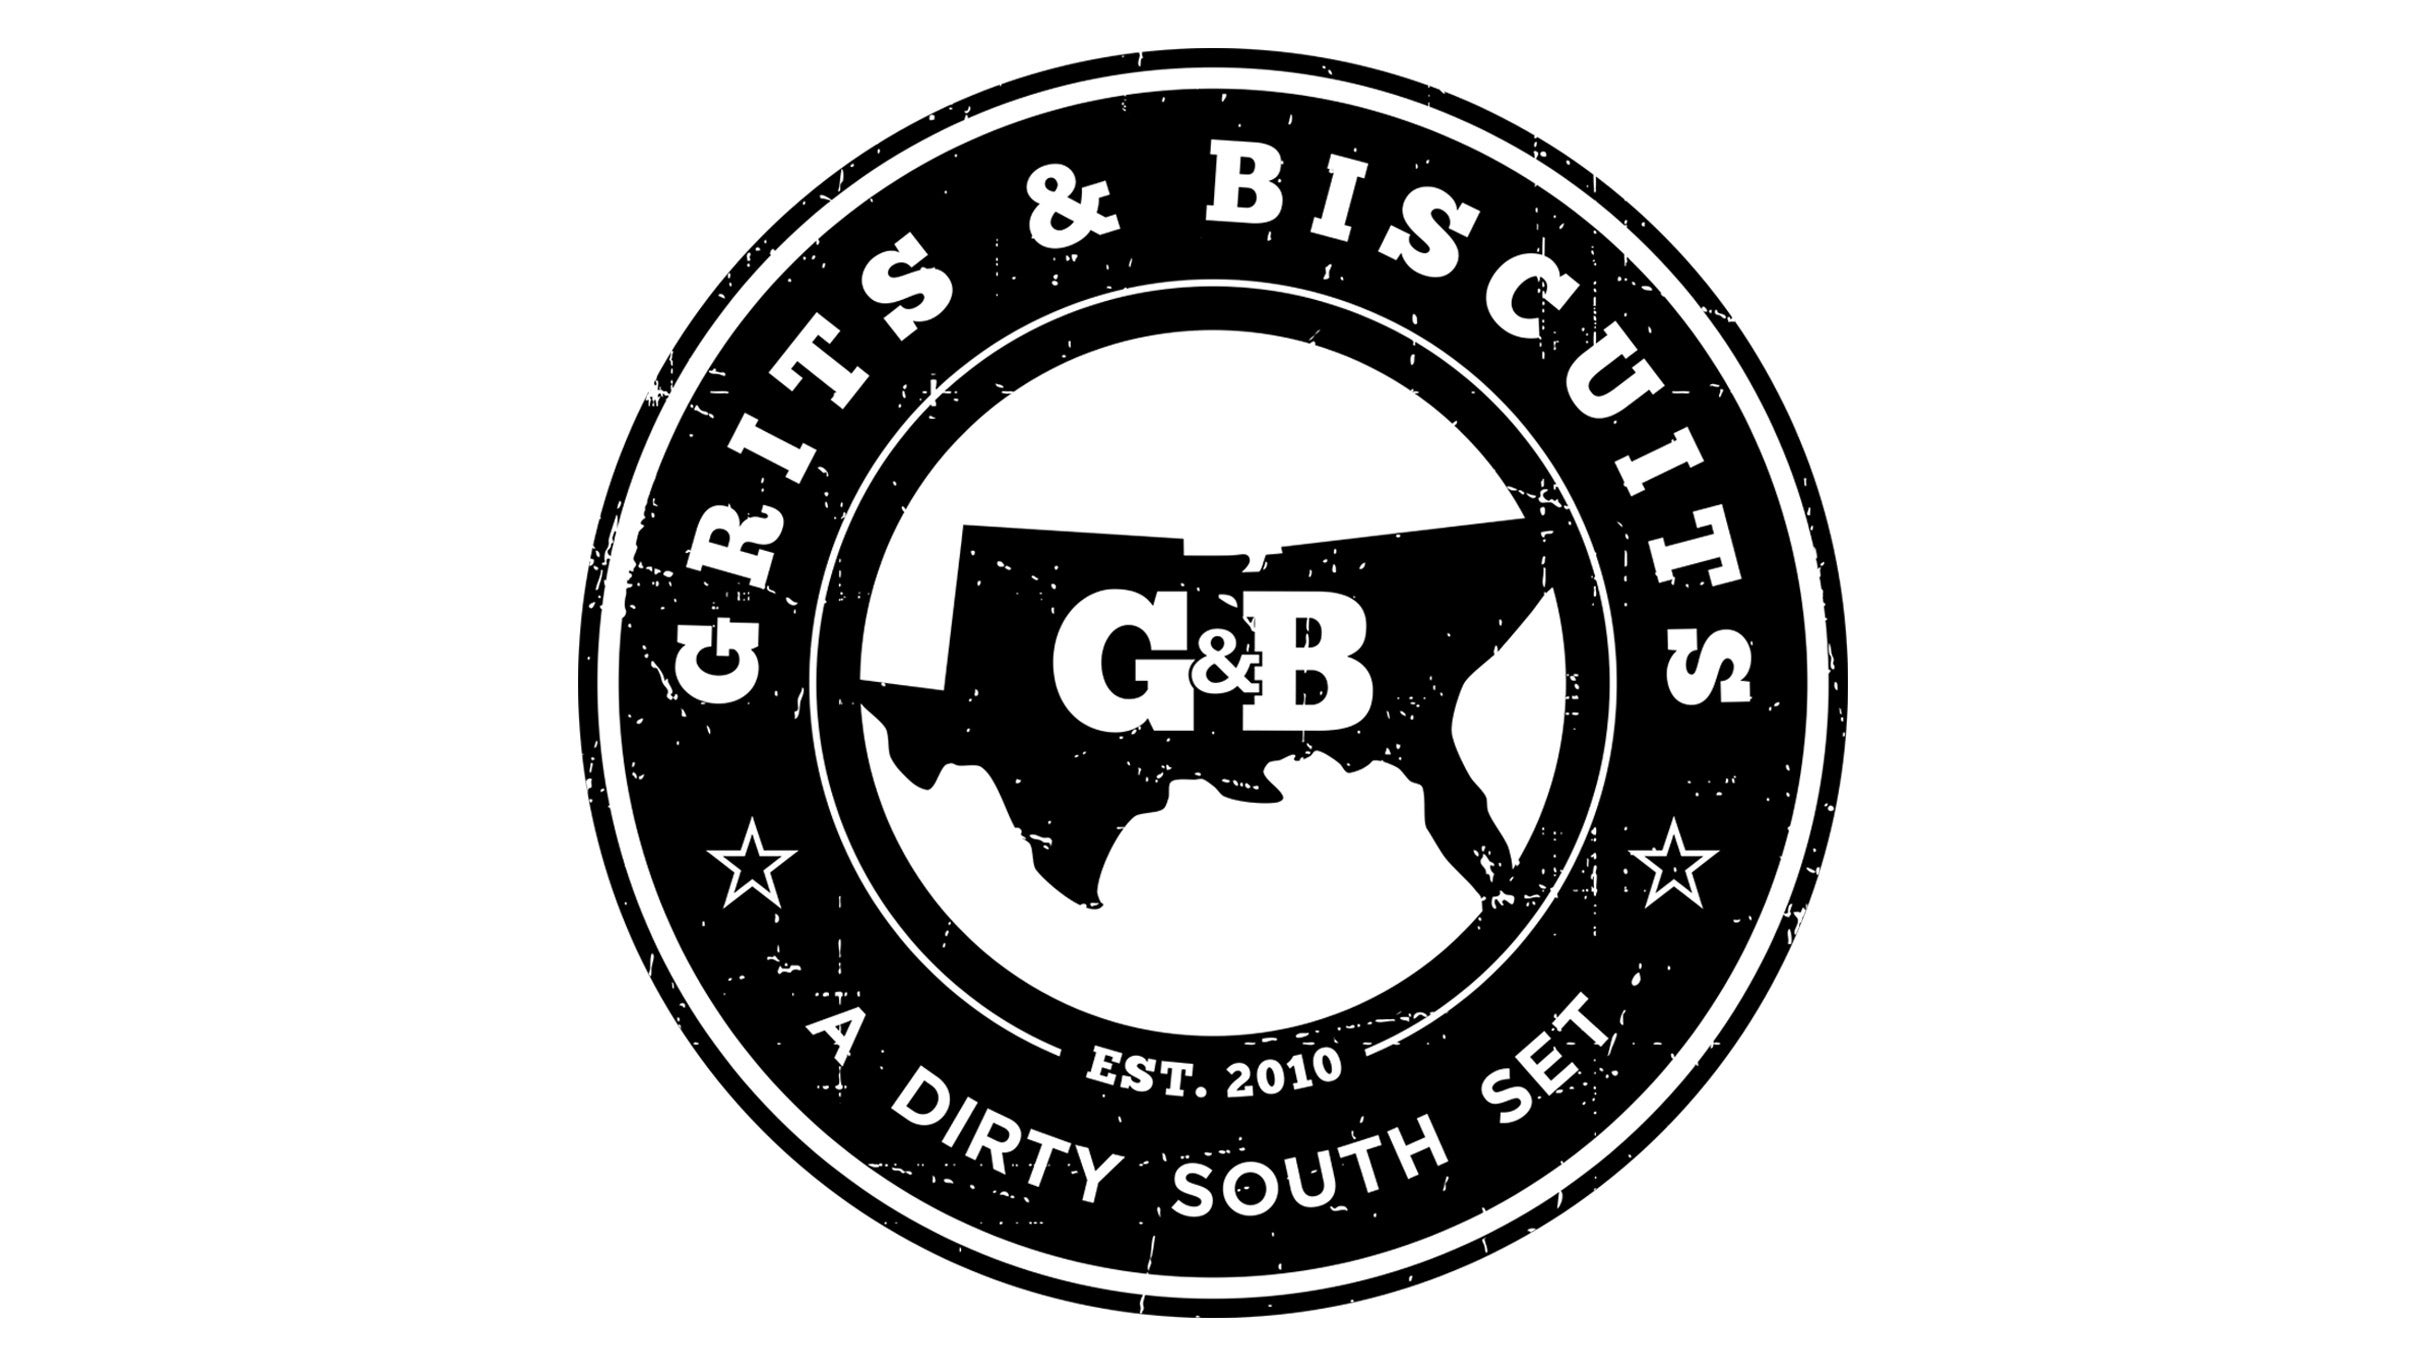 Grits & Biscuits at House of Blues Chicago